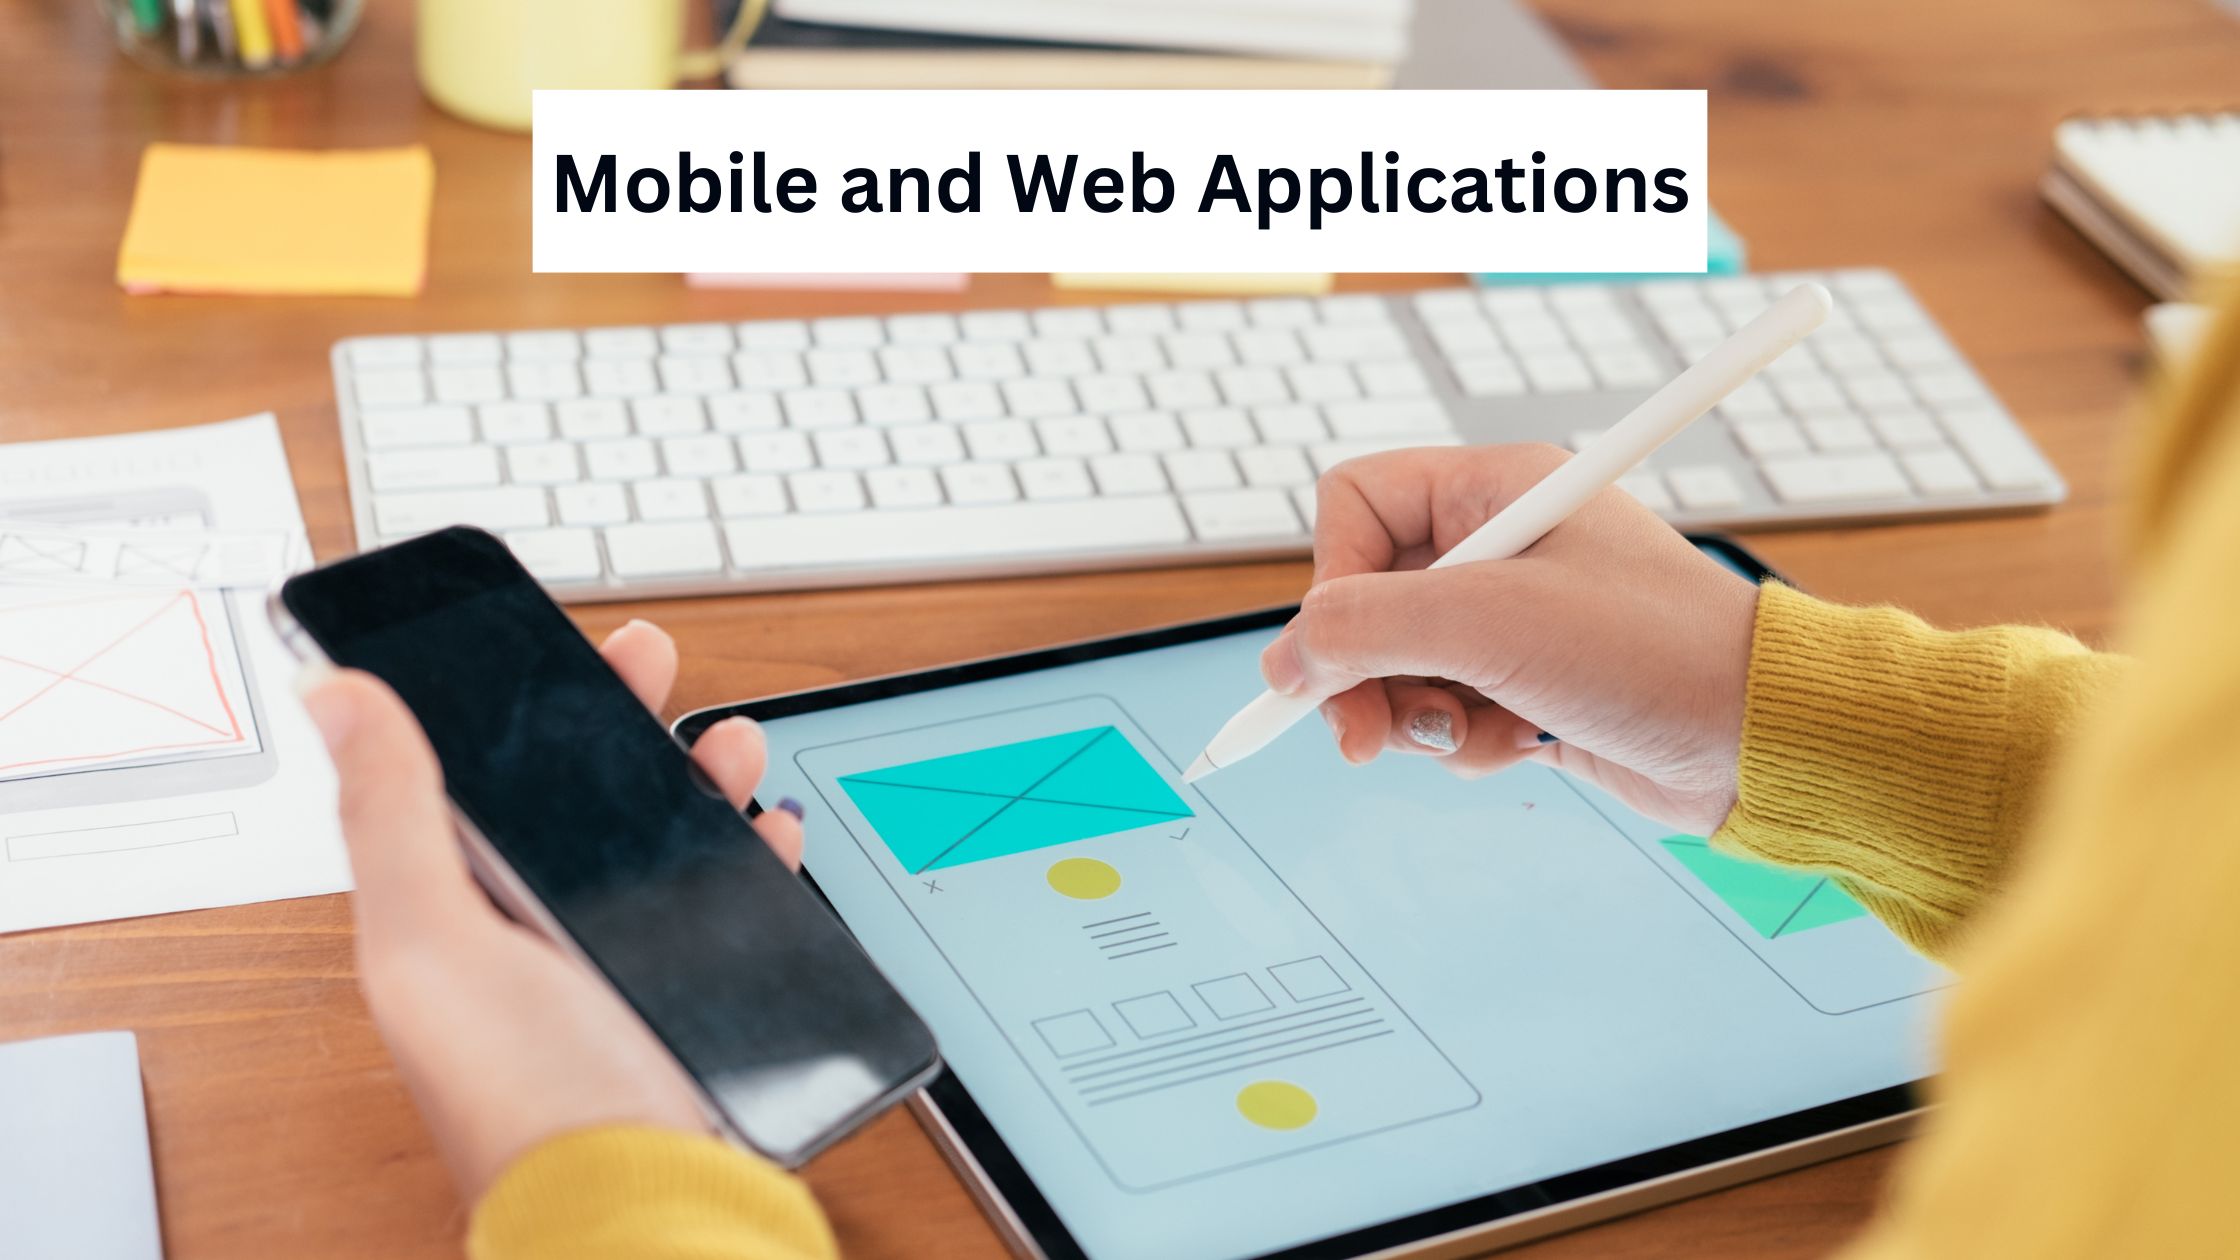 Mobile and web applications